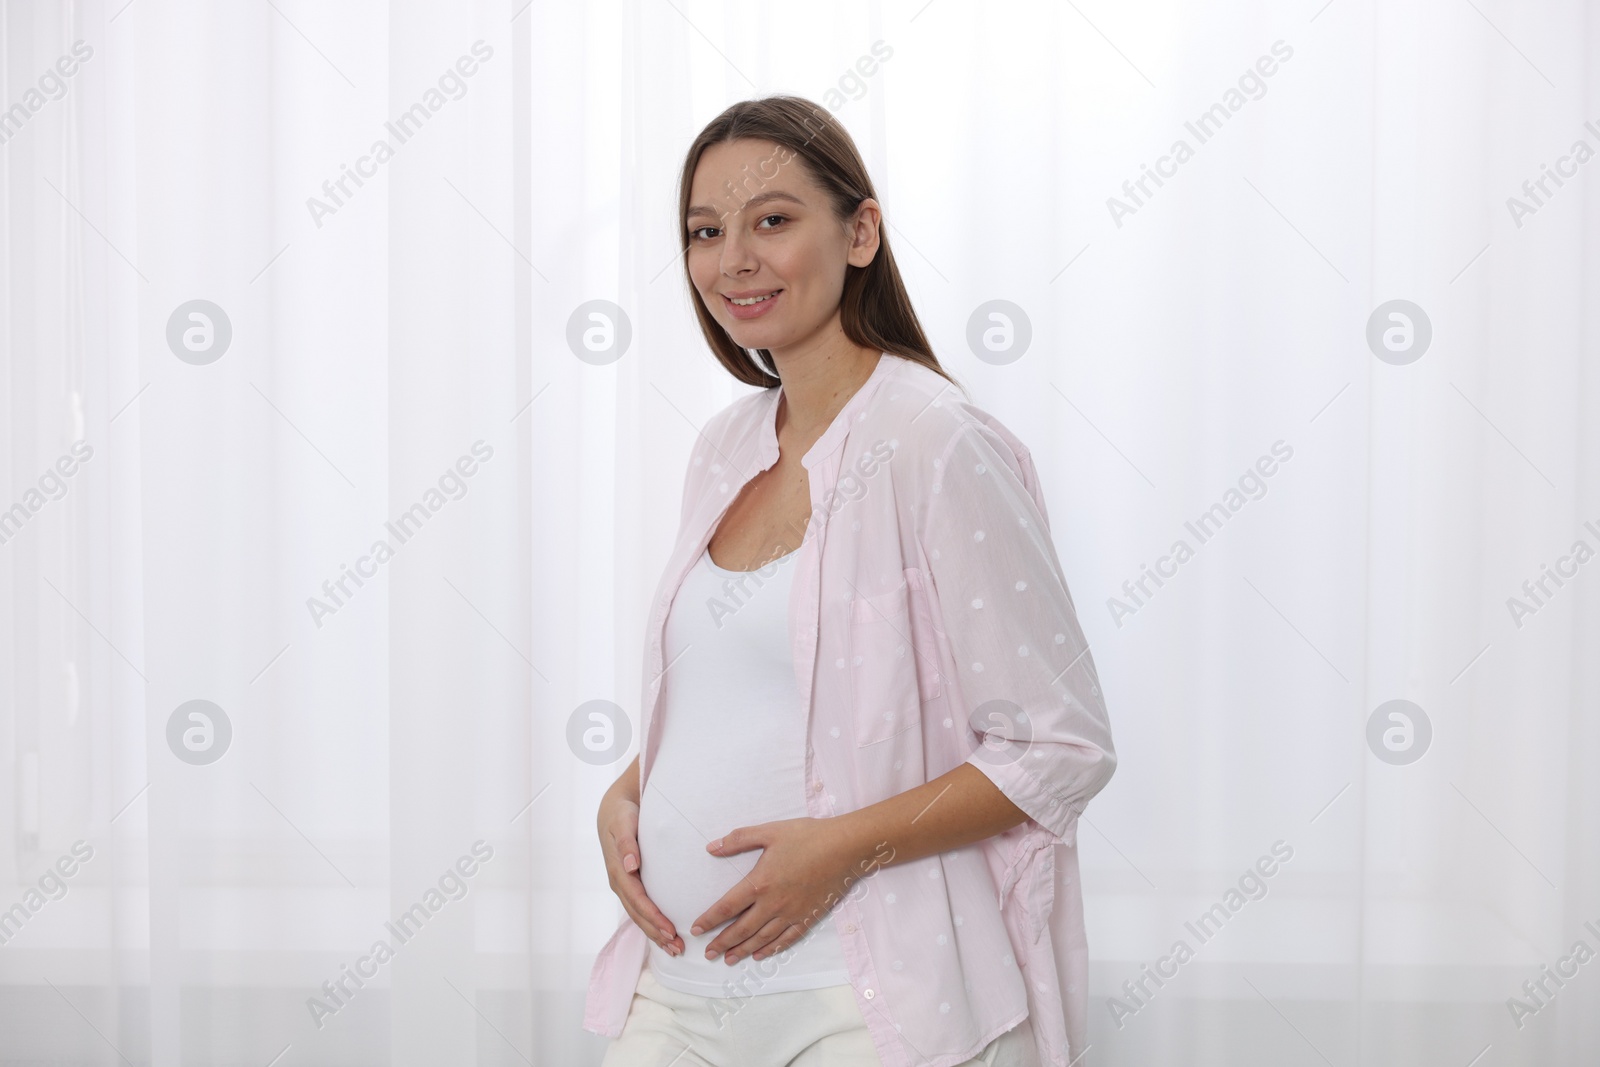 Photo of Beautiful pregnant woman in pink shirt near window indoors